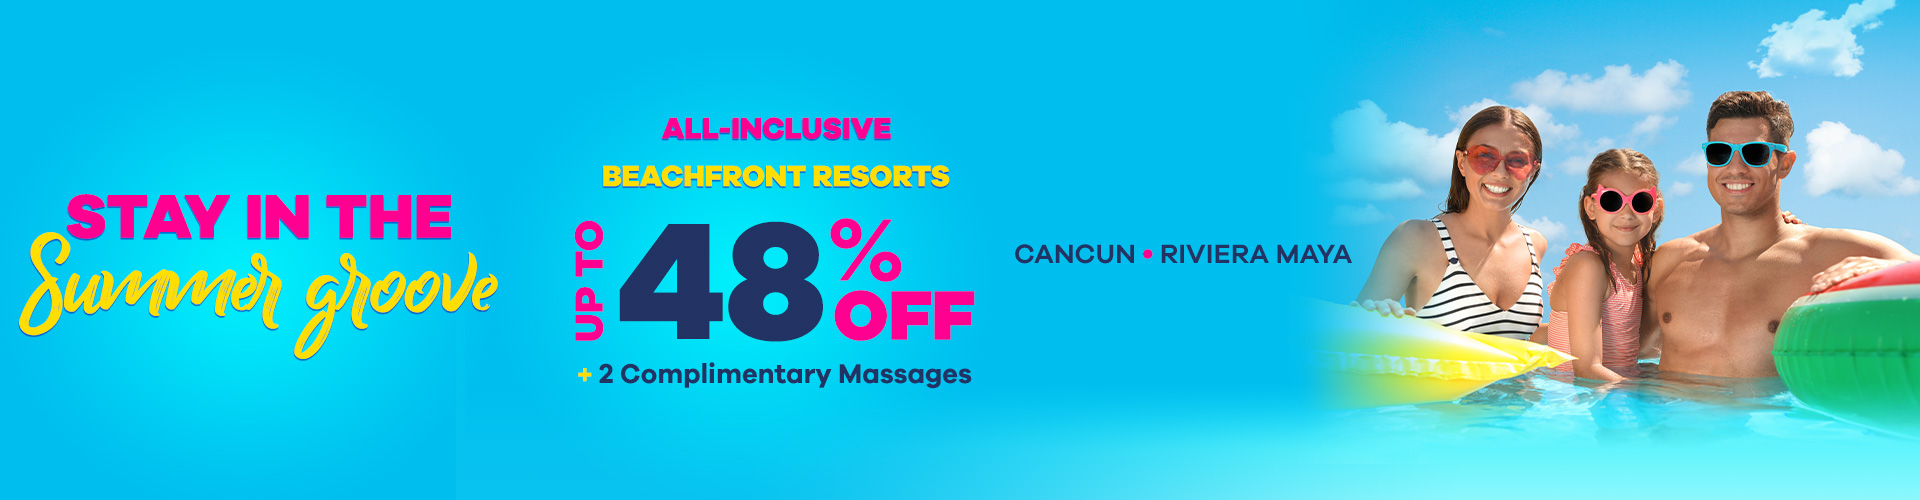 Unforgettable Caribbean Vacations in Cancun and Riviera Maya Resorts